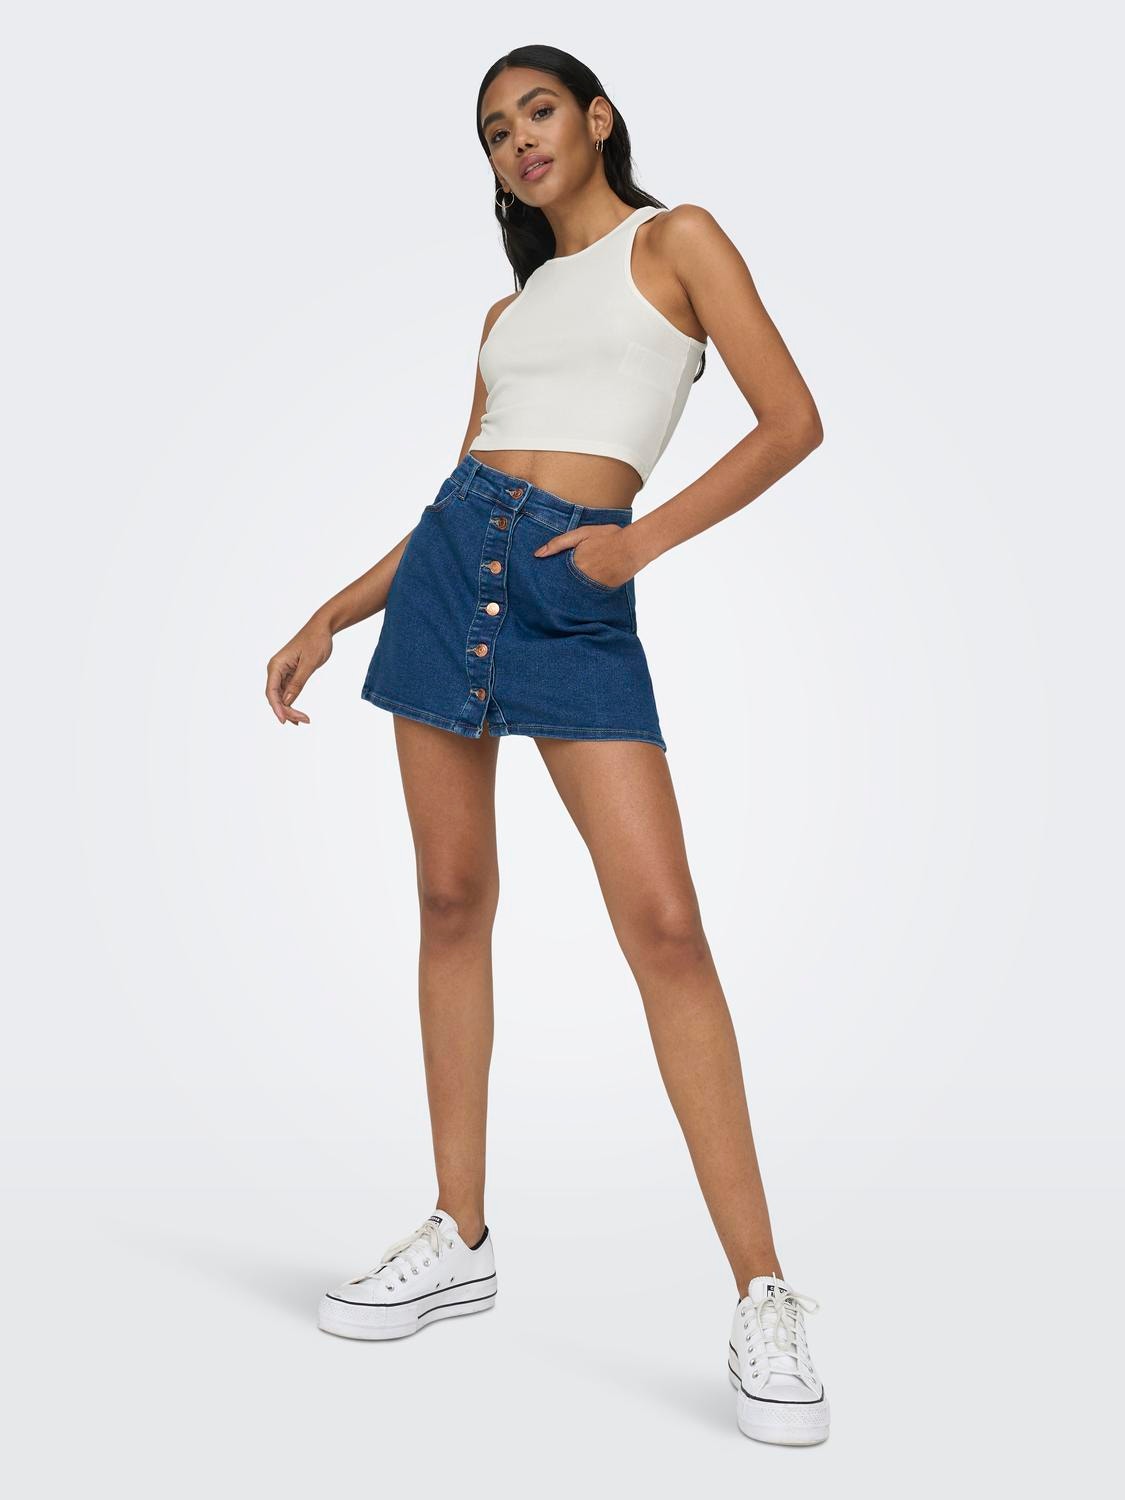 ONLY Cropped fit O-hals Top -Cloud Dancer - 15289846